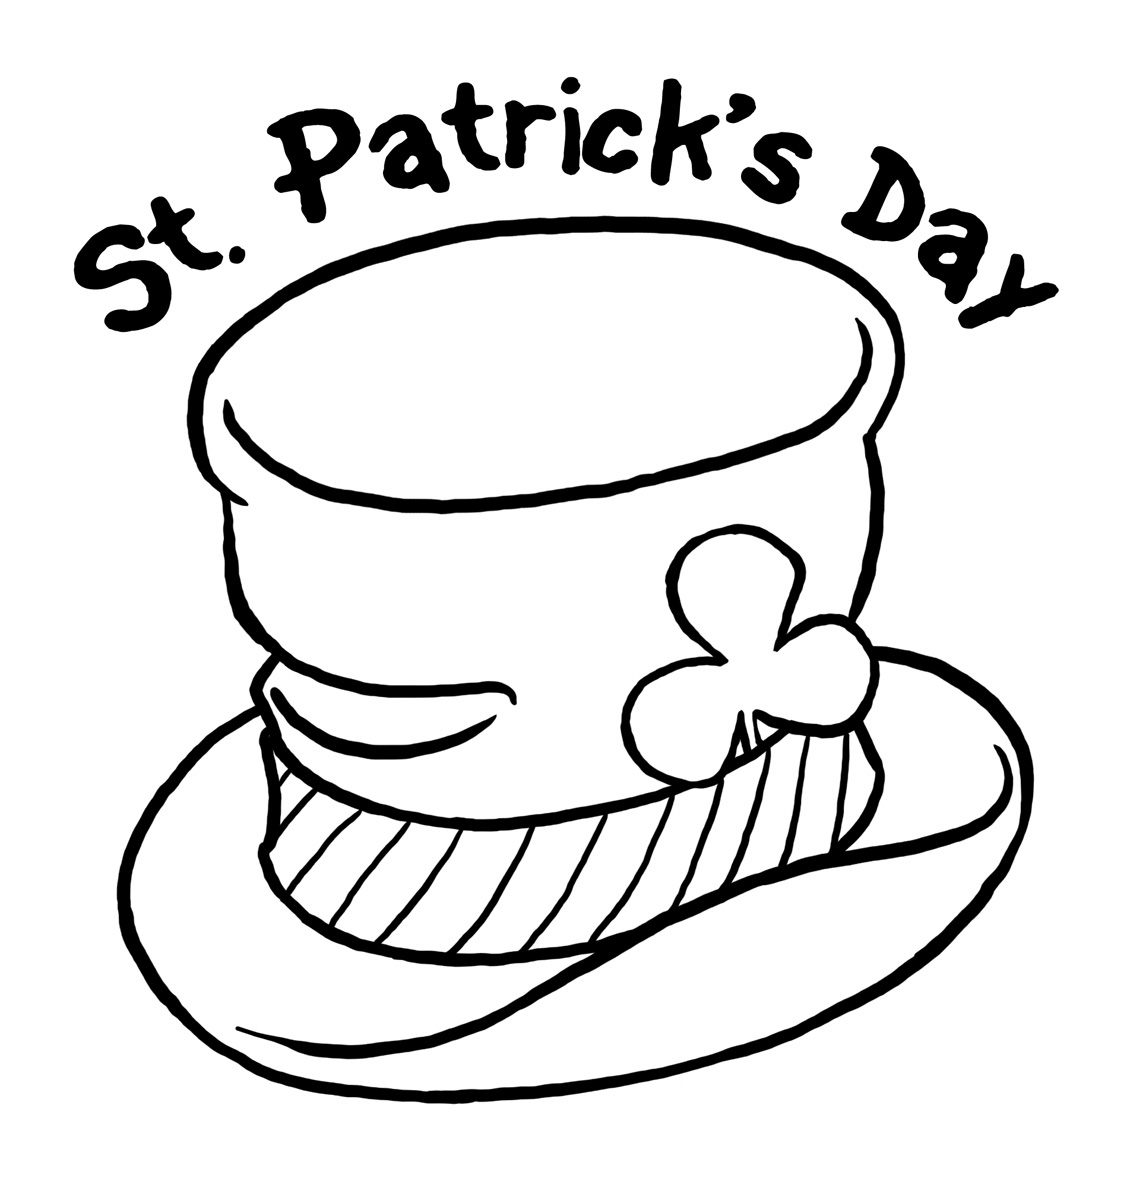 st-patricks-day-drawings-cliparts-co